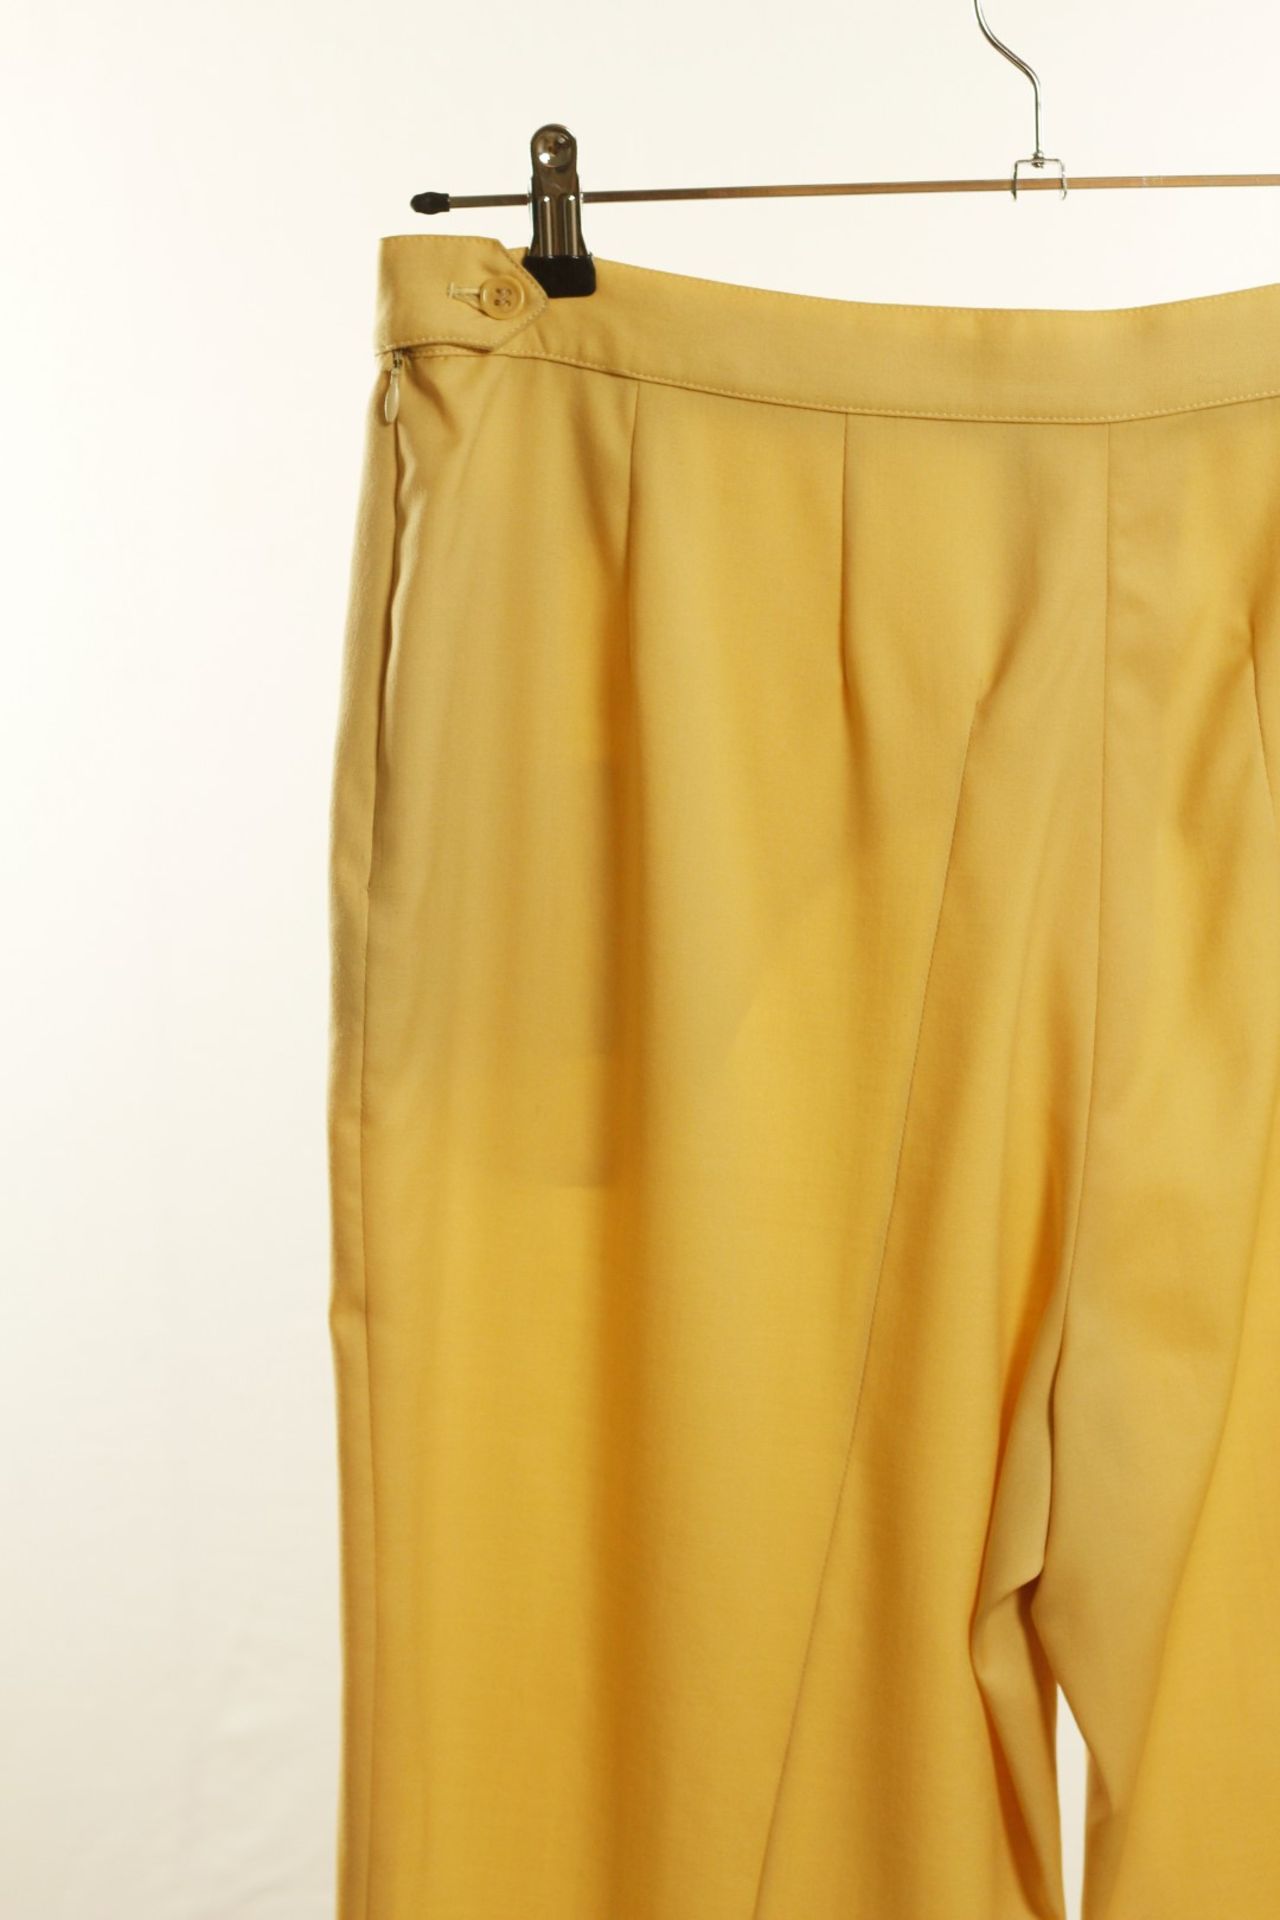 1 x Artico Cream Trousers - Size: 18 - Material: 100% Leather. Lining 50% viscose, 50% Acetate - - Image 7 of 9